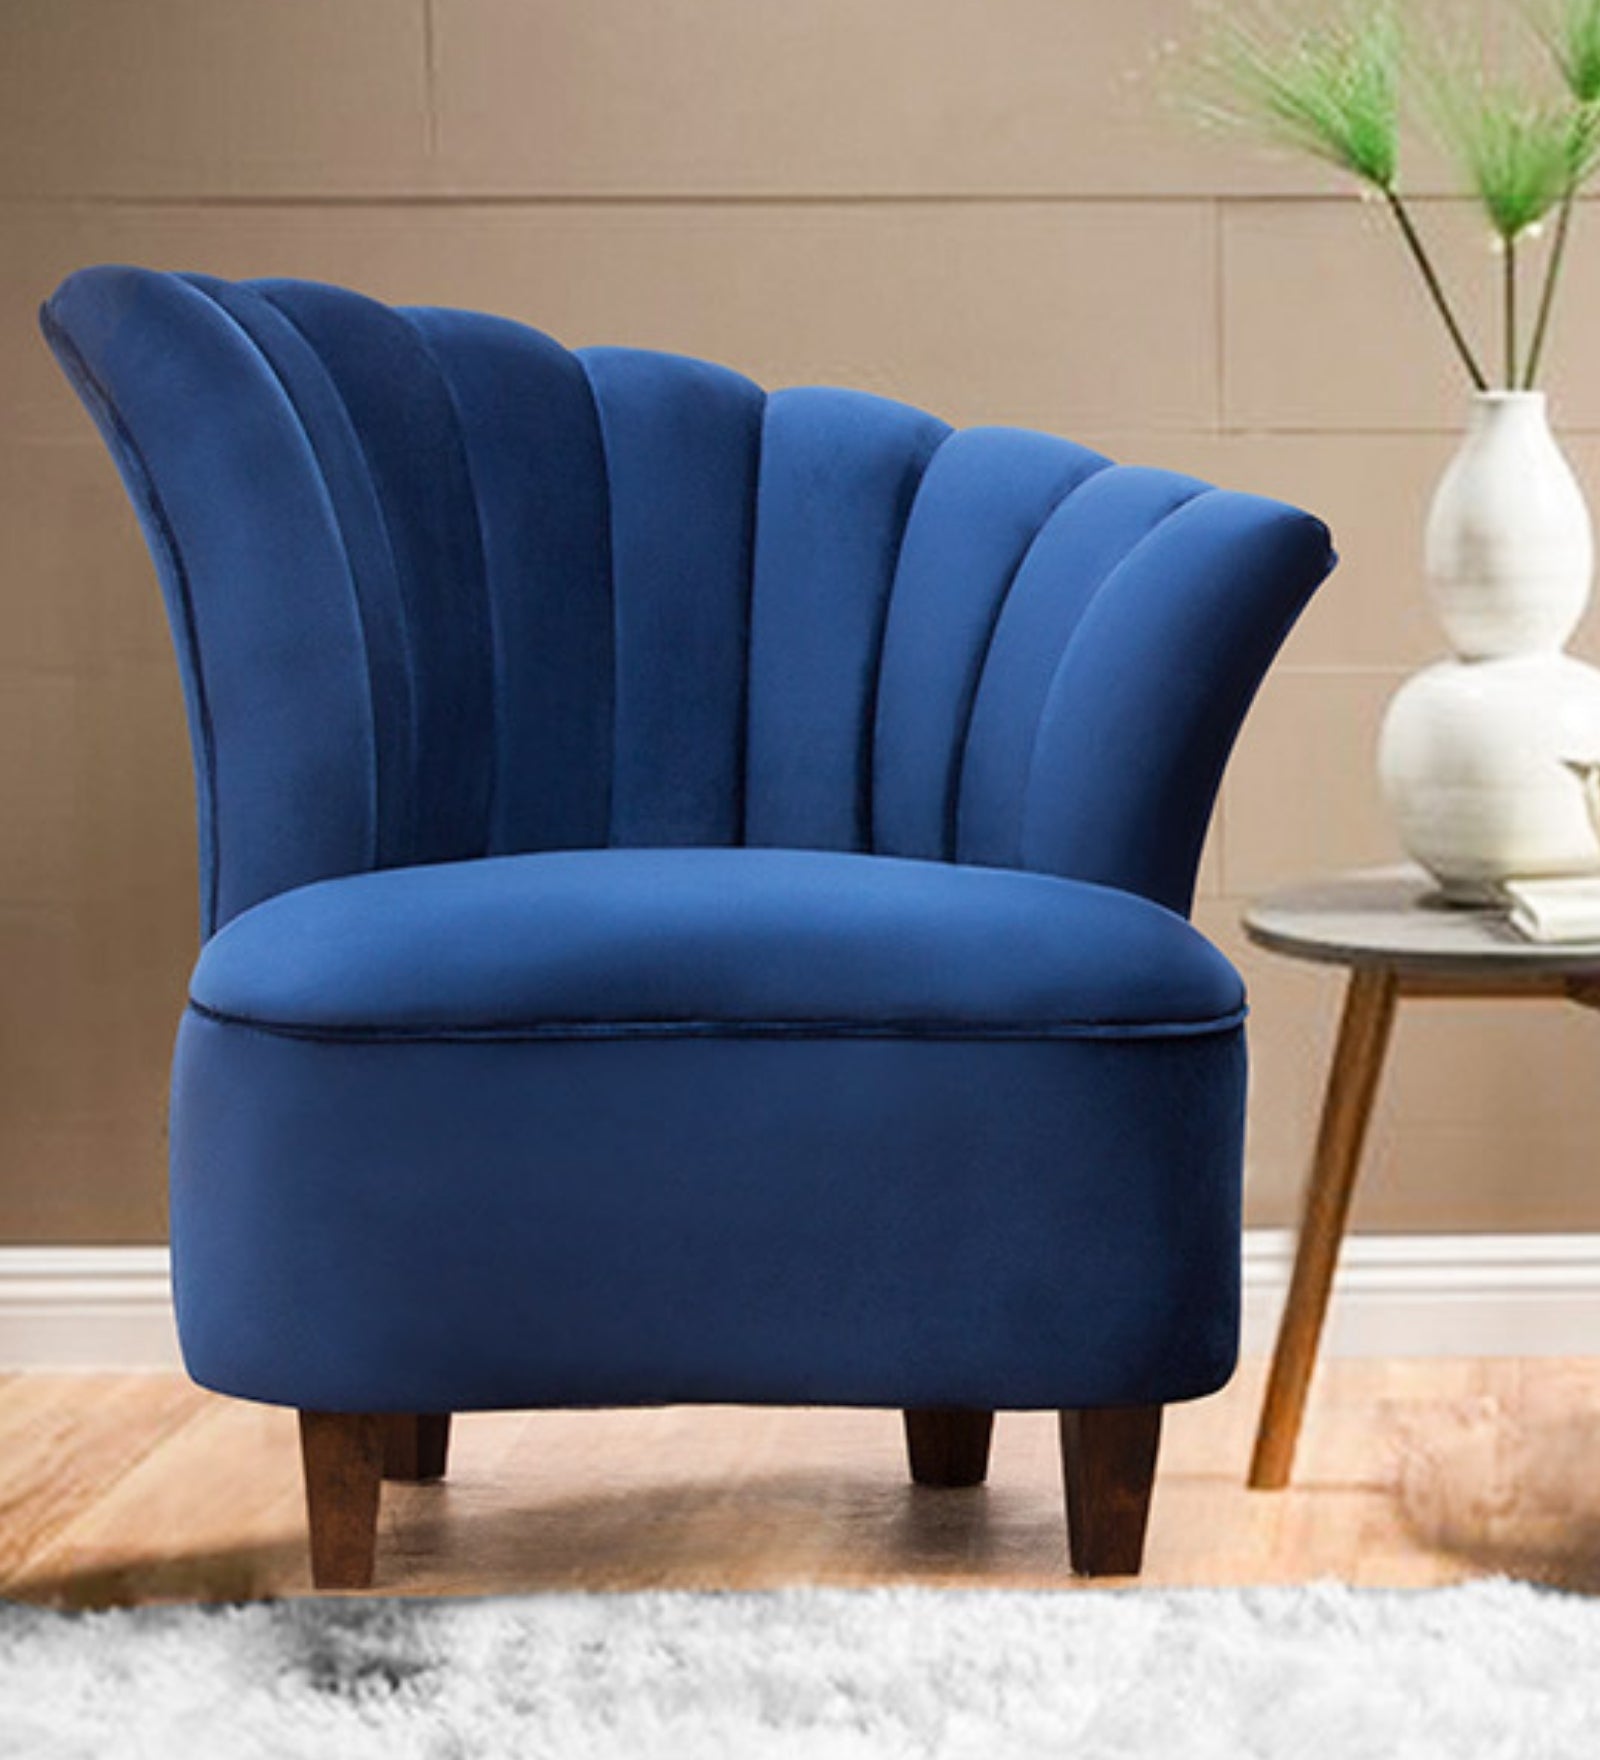 Davo Velvet Accent Chair in Imperial Blue Colour